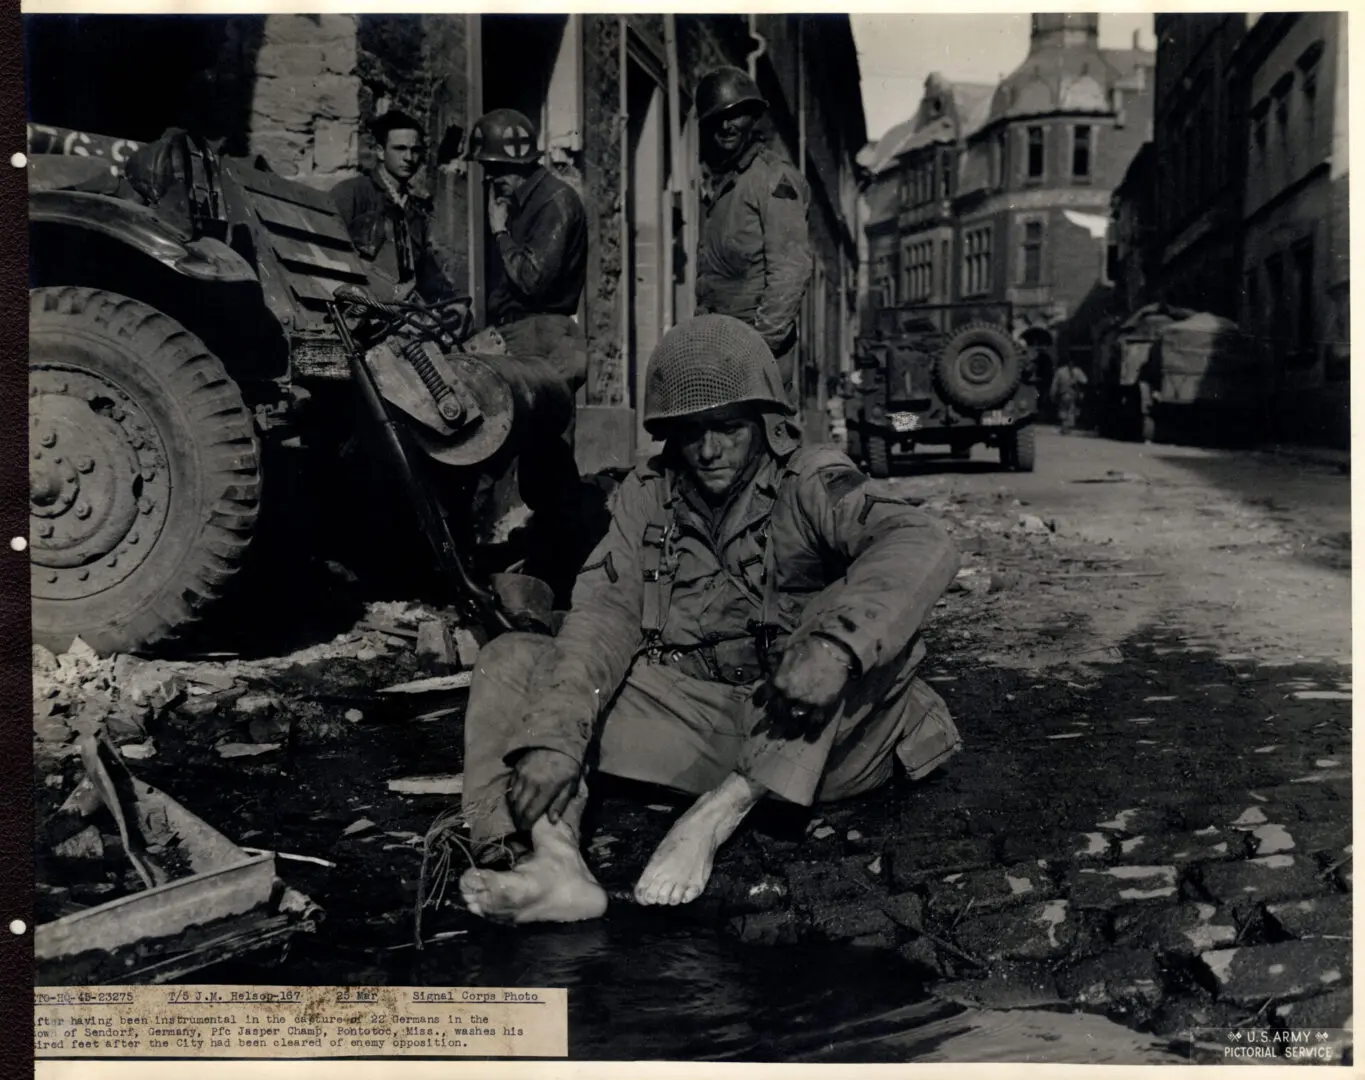 American soldier washing his tired feet after a mission